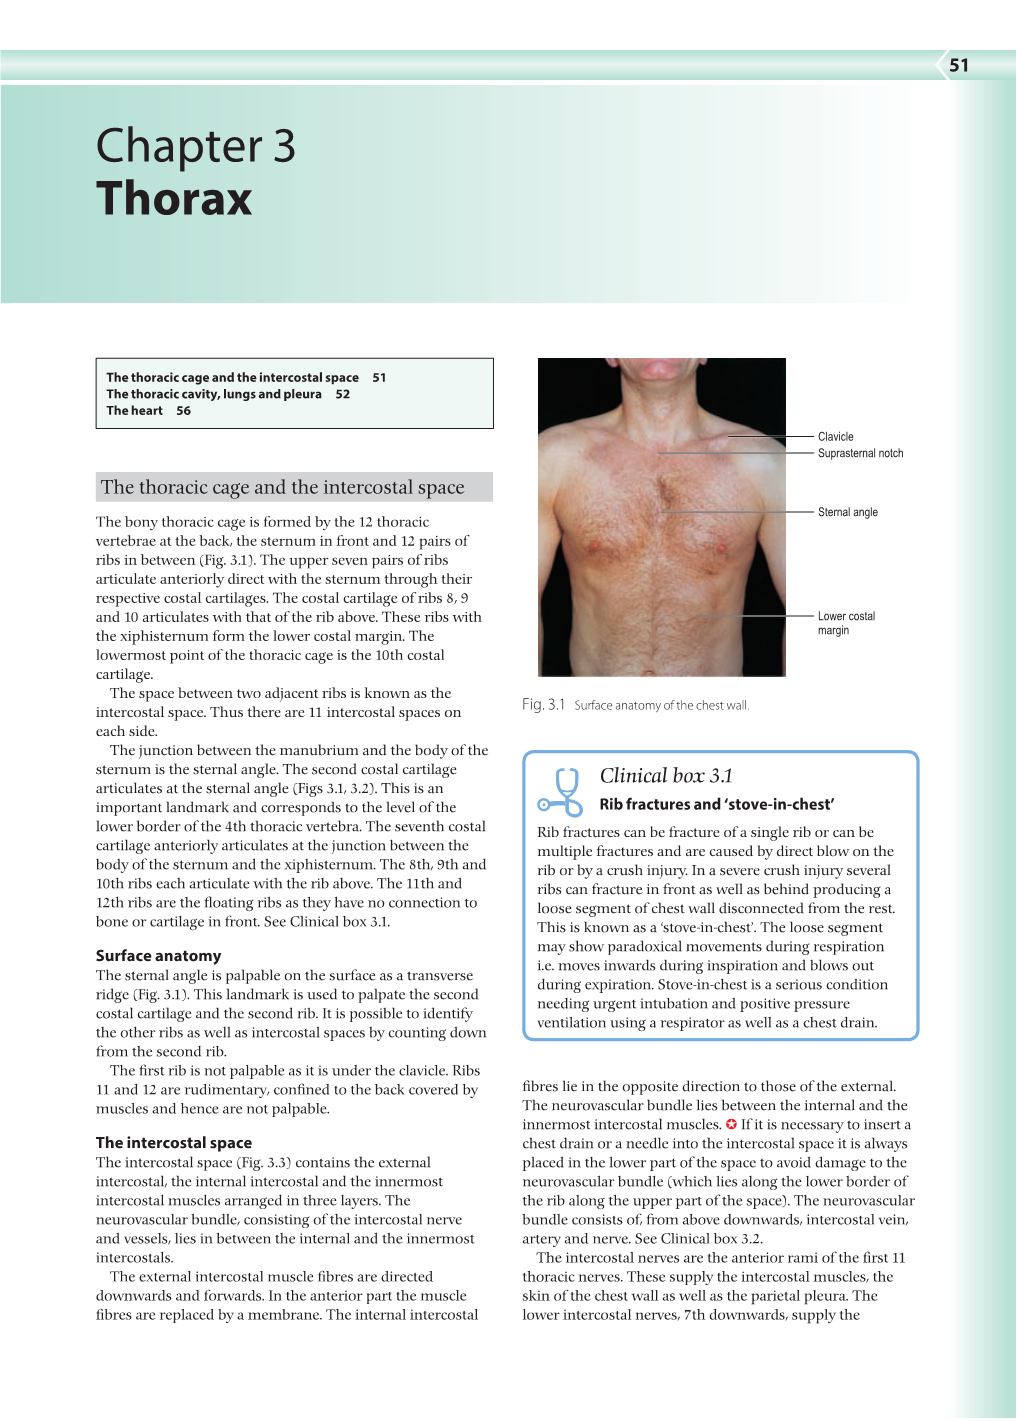 Chapter 3 Thorax